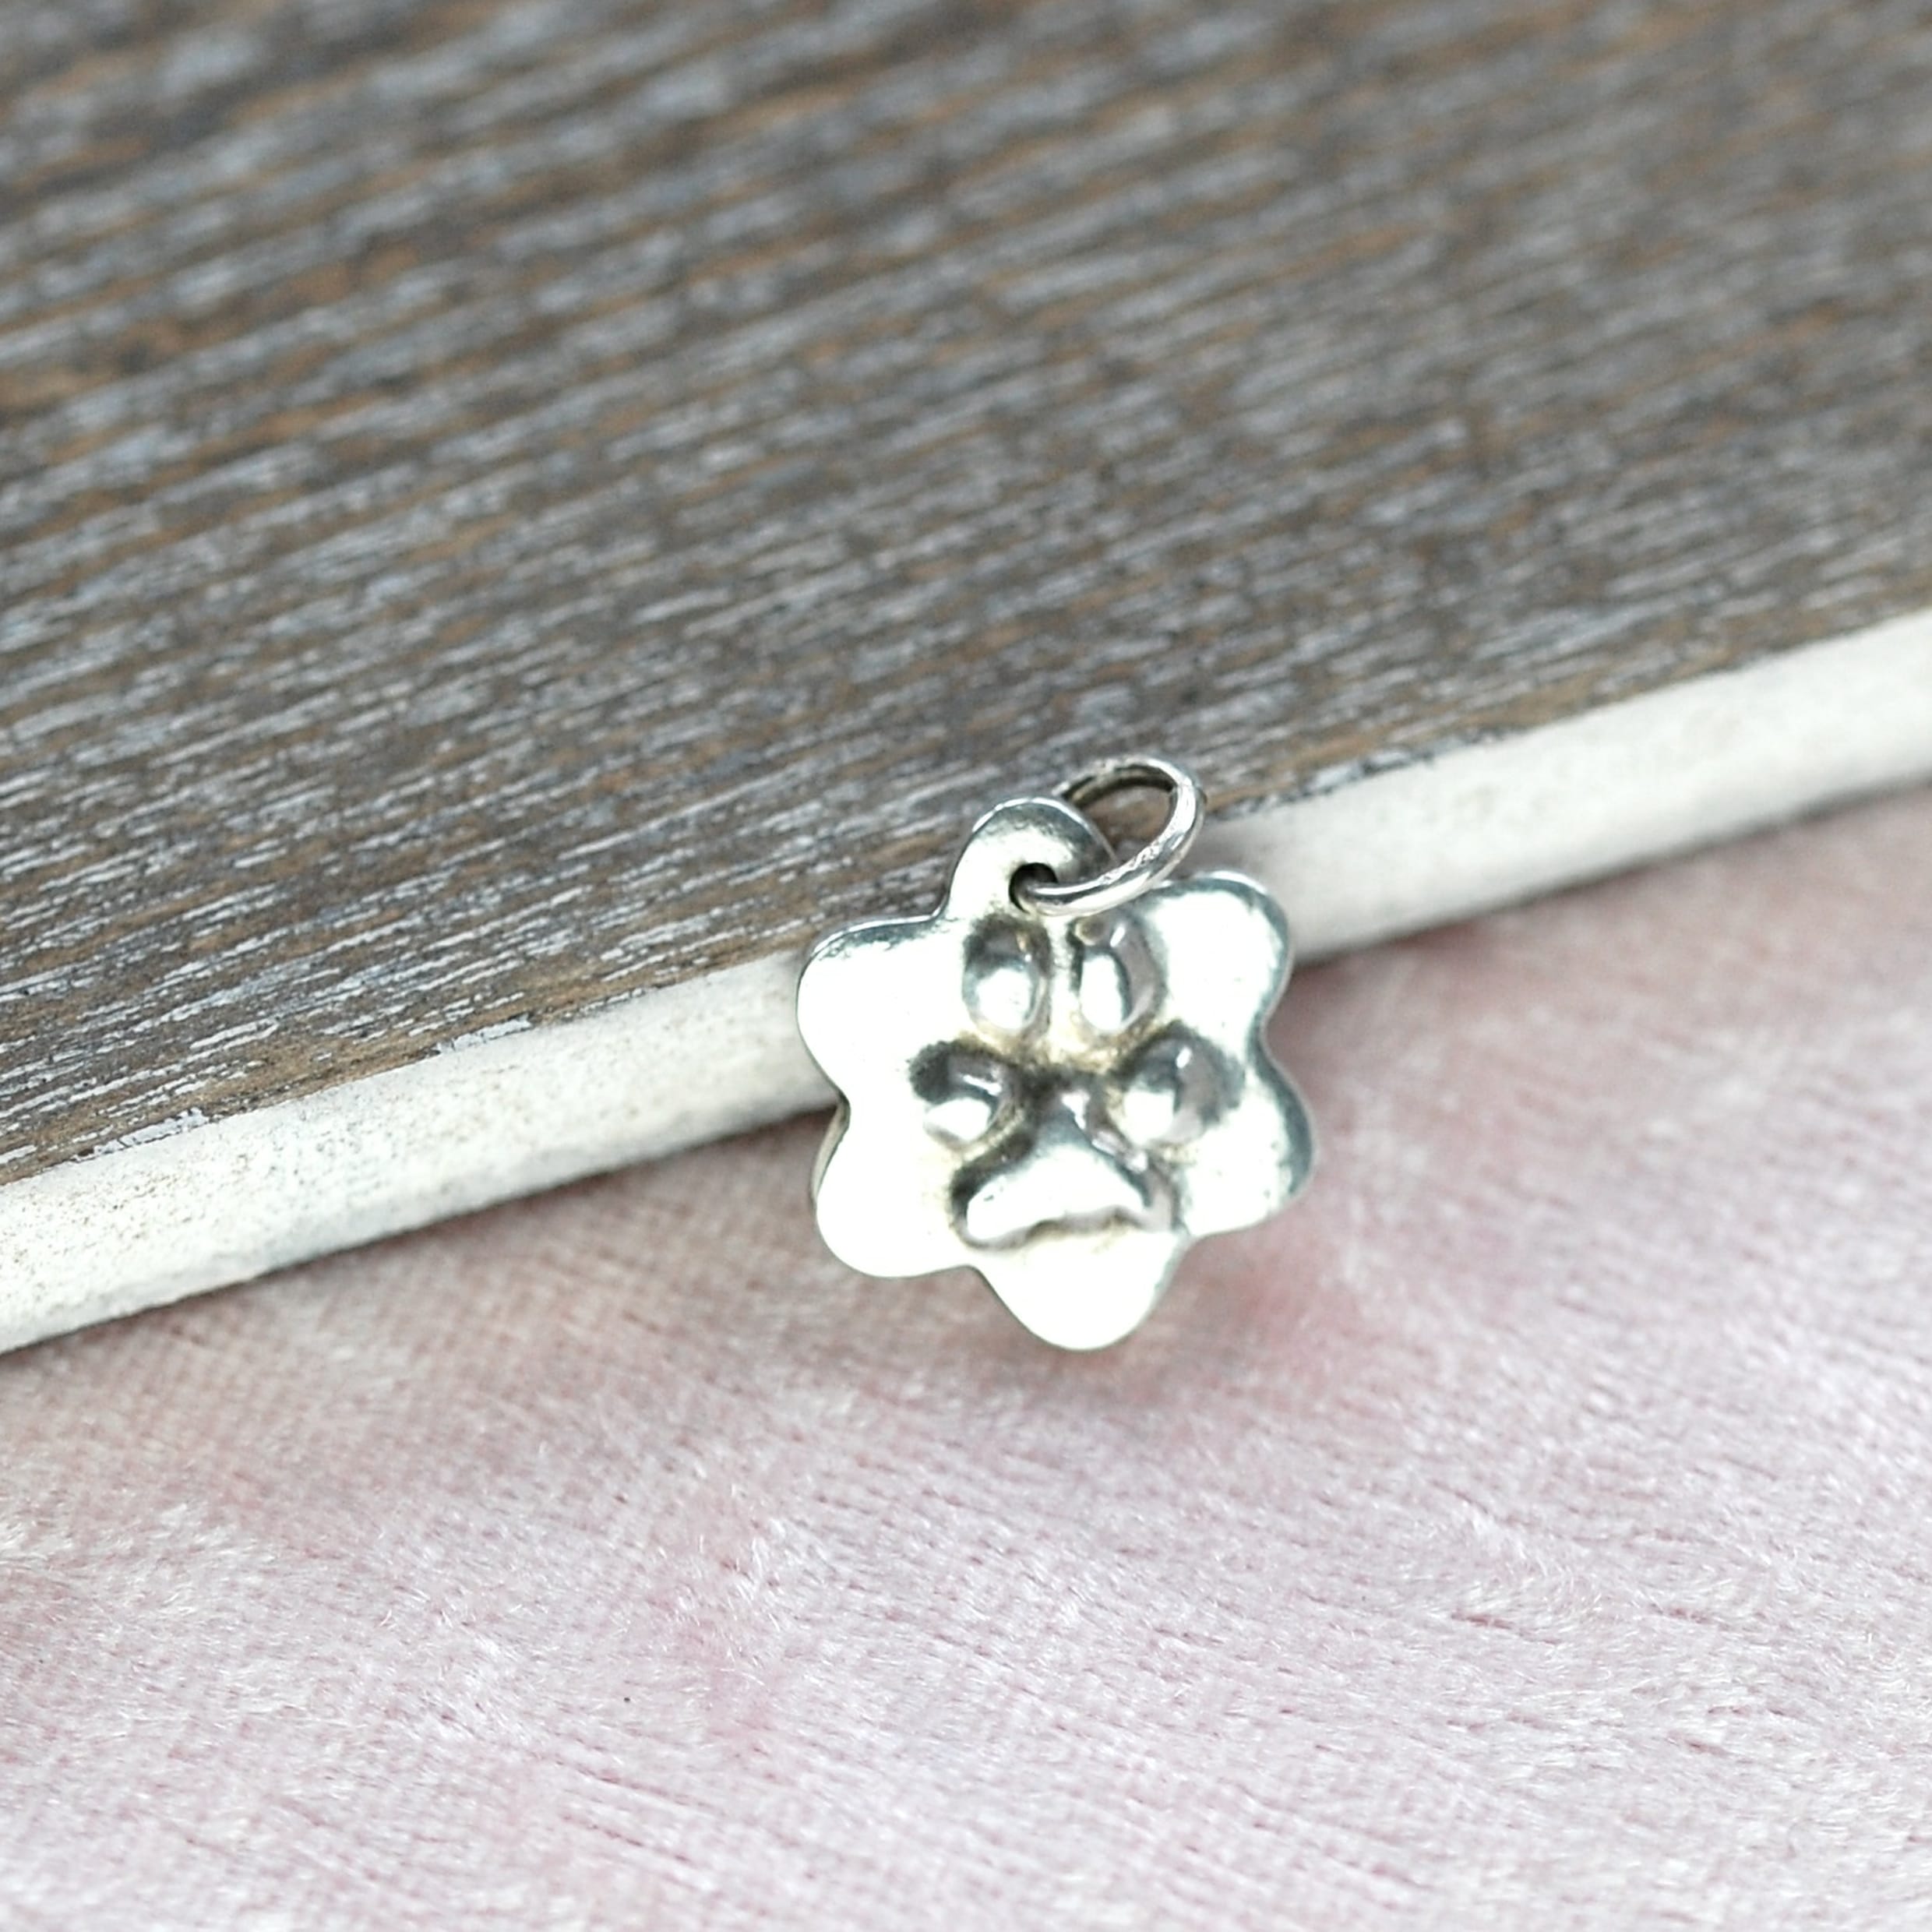 Smal silver flower charm with raised paw print